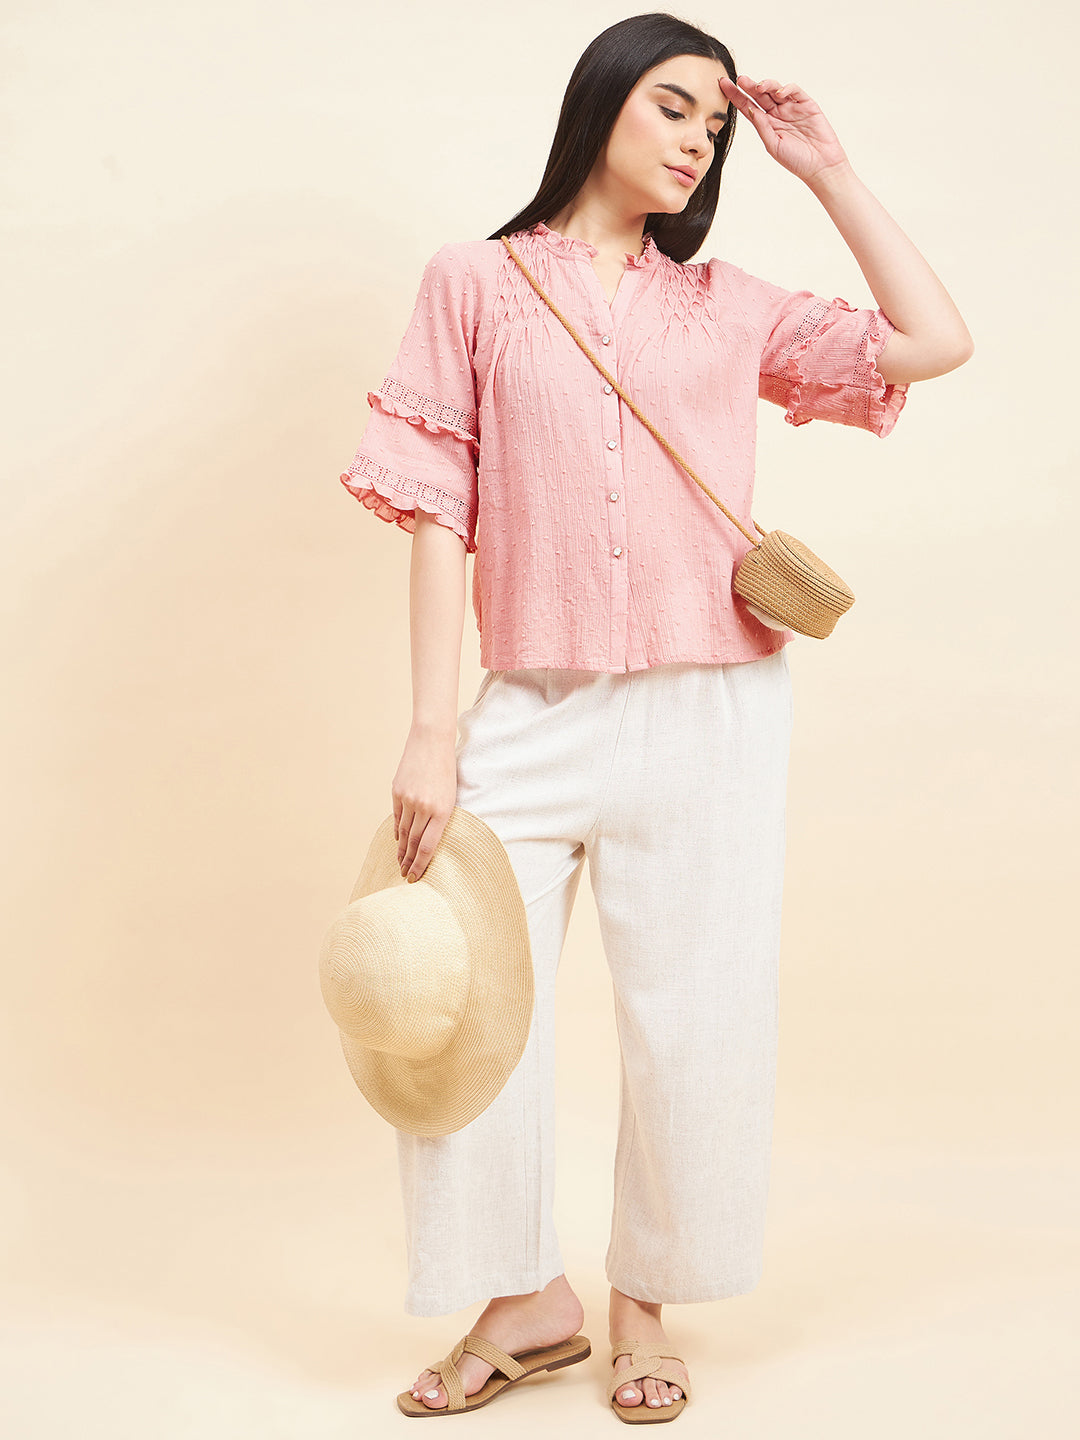 Gipsy Women Solid Lace Cotton Blush Pink Top